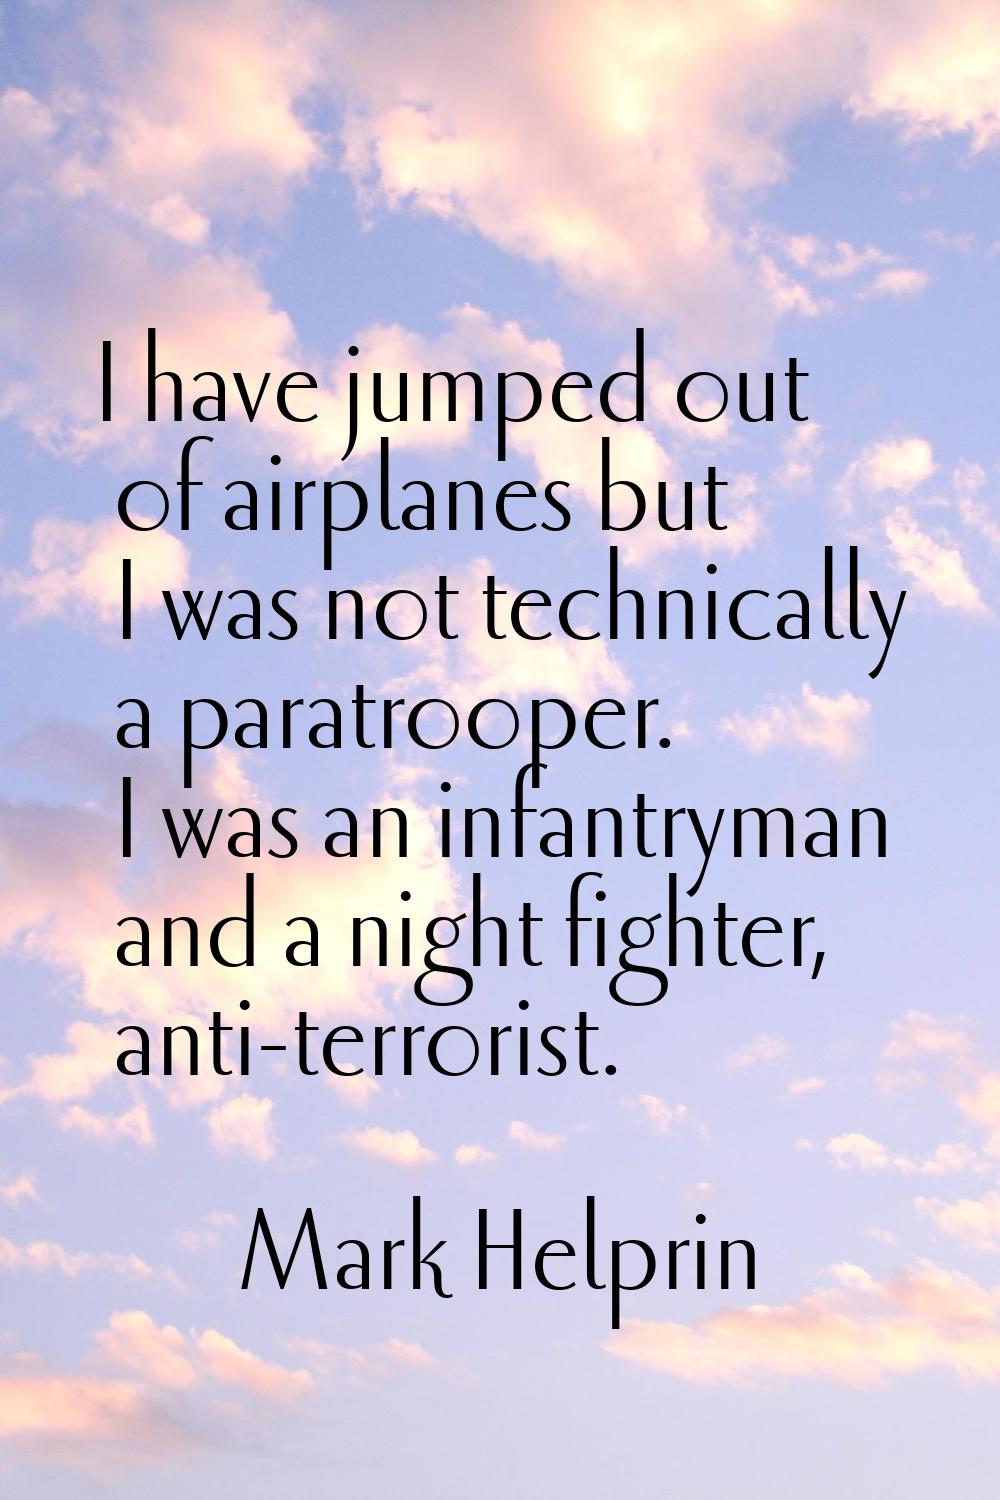 I have jumped out of airplanes but I was not technically a paratrooper. I was an infantryman and a 